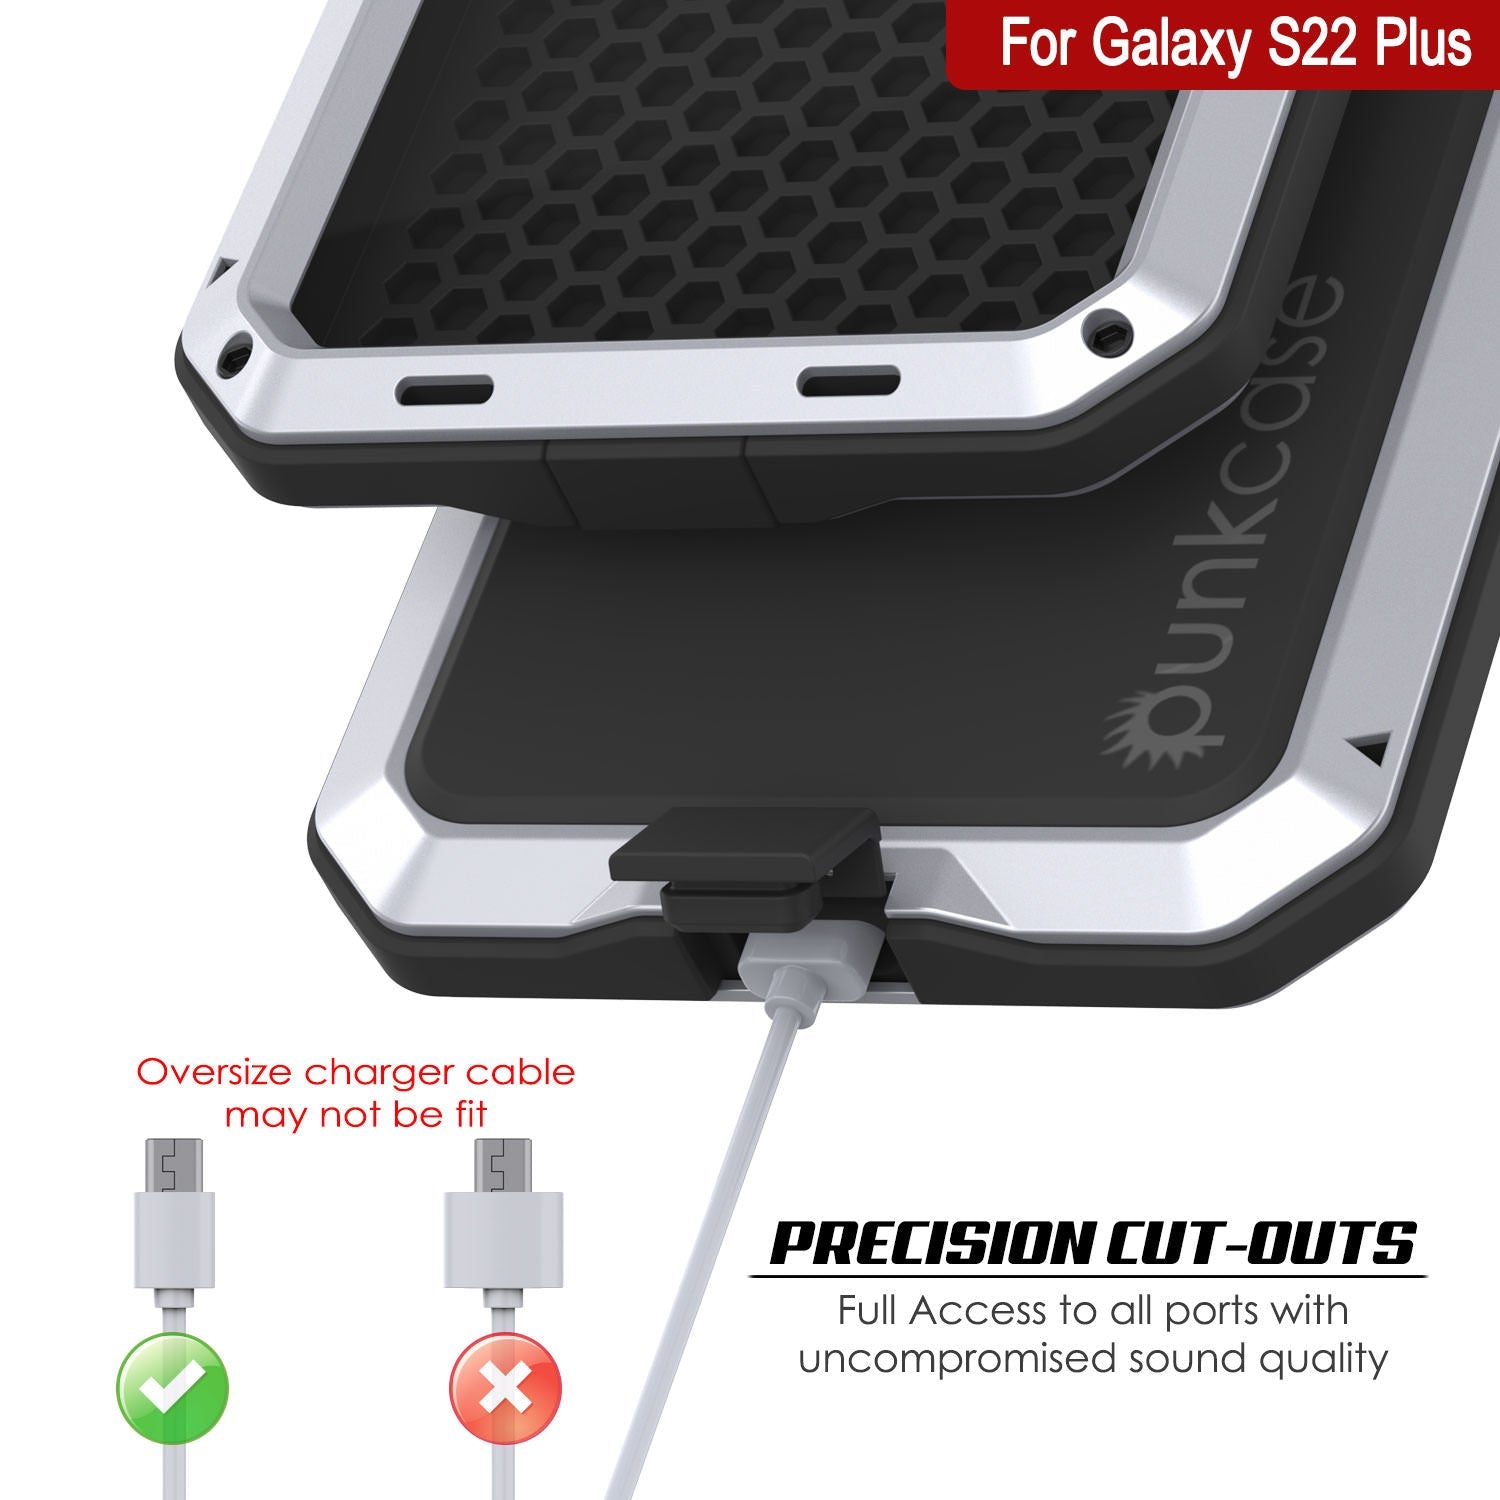 Galaxy S22+ Plus Metal Case, Heavy Duty Military Grade Rugged Armor Cover [White]